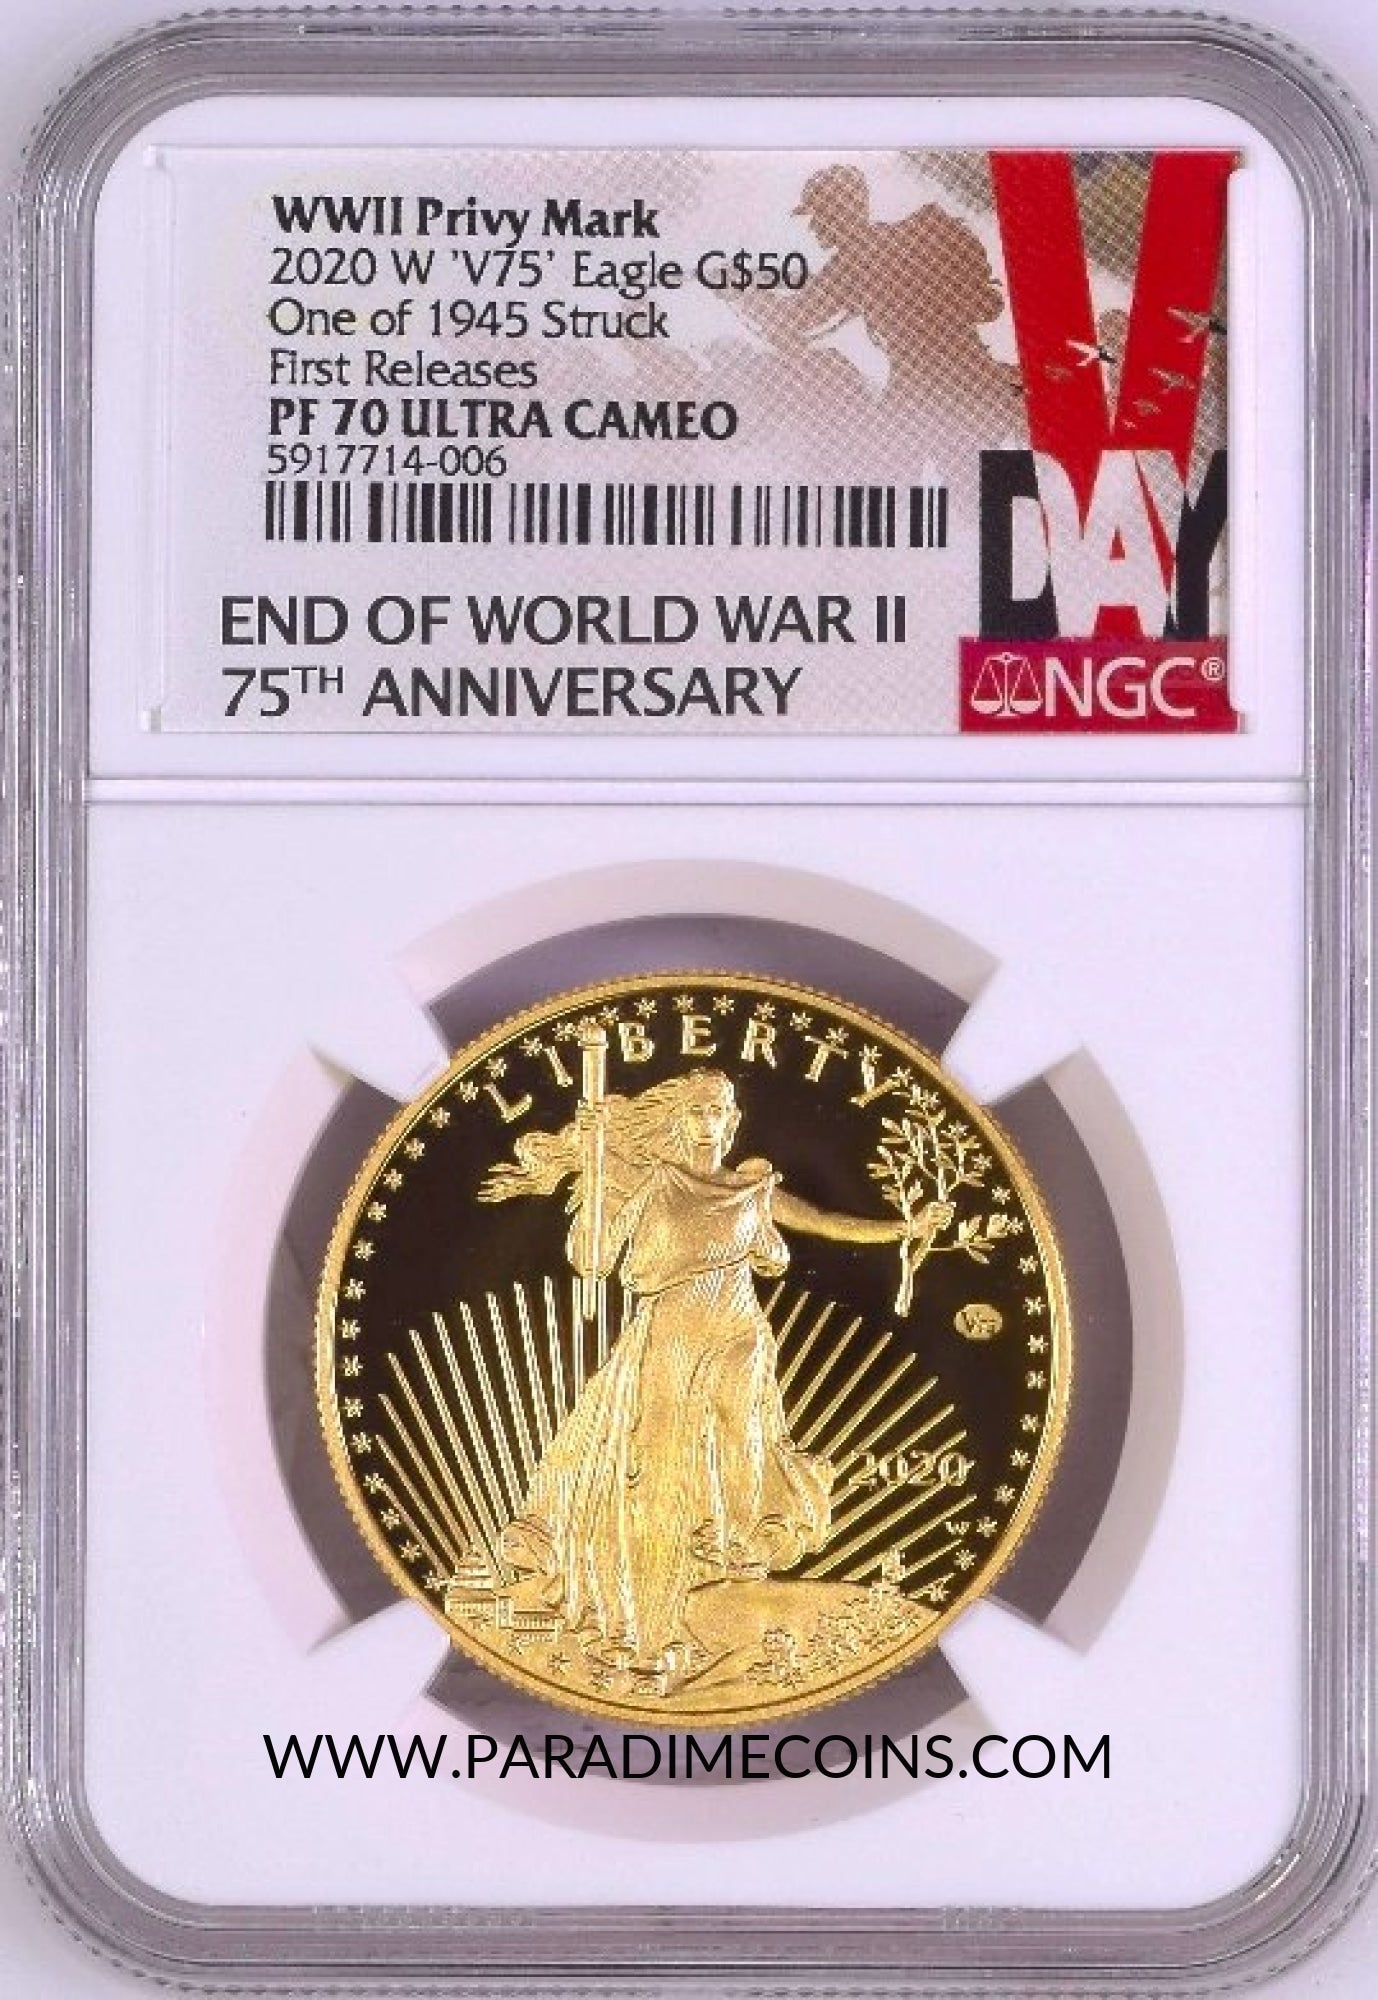 2020-W V75 $50 WWII Privy NGC PF70UCAM First Releases 20XE American Gold Eagle #3 - Paradime Coins | PCGS NGC CACG CAC Rare US Numismatic Coins For Sale